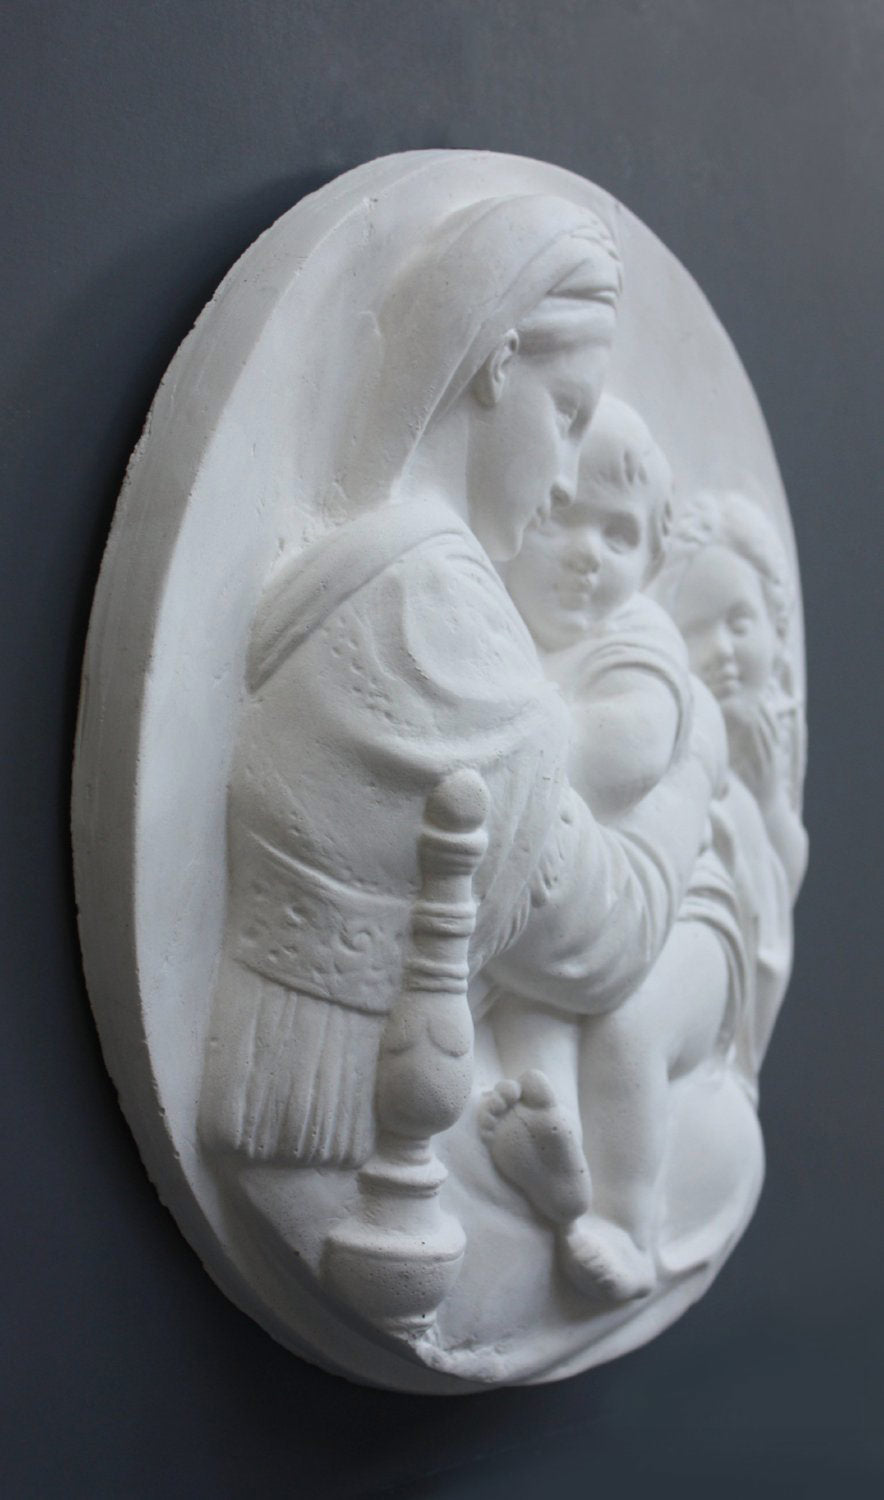 three-quarter photo of relief plaster cast featuring the Madonna, Child, and St. John and hanging on a dark-colored wall